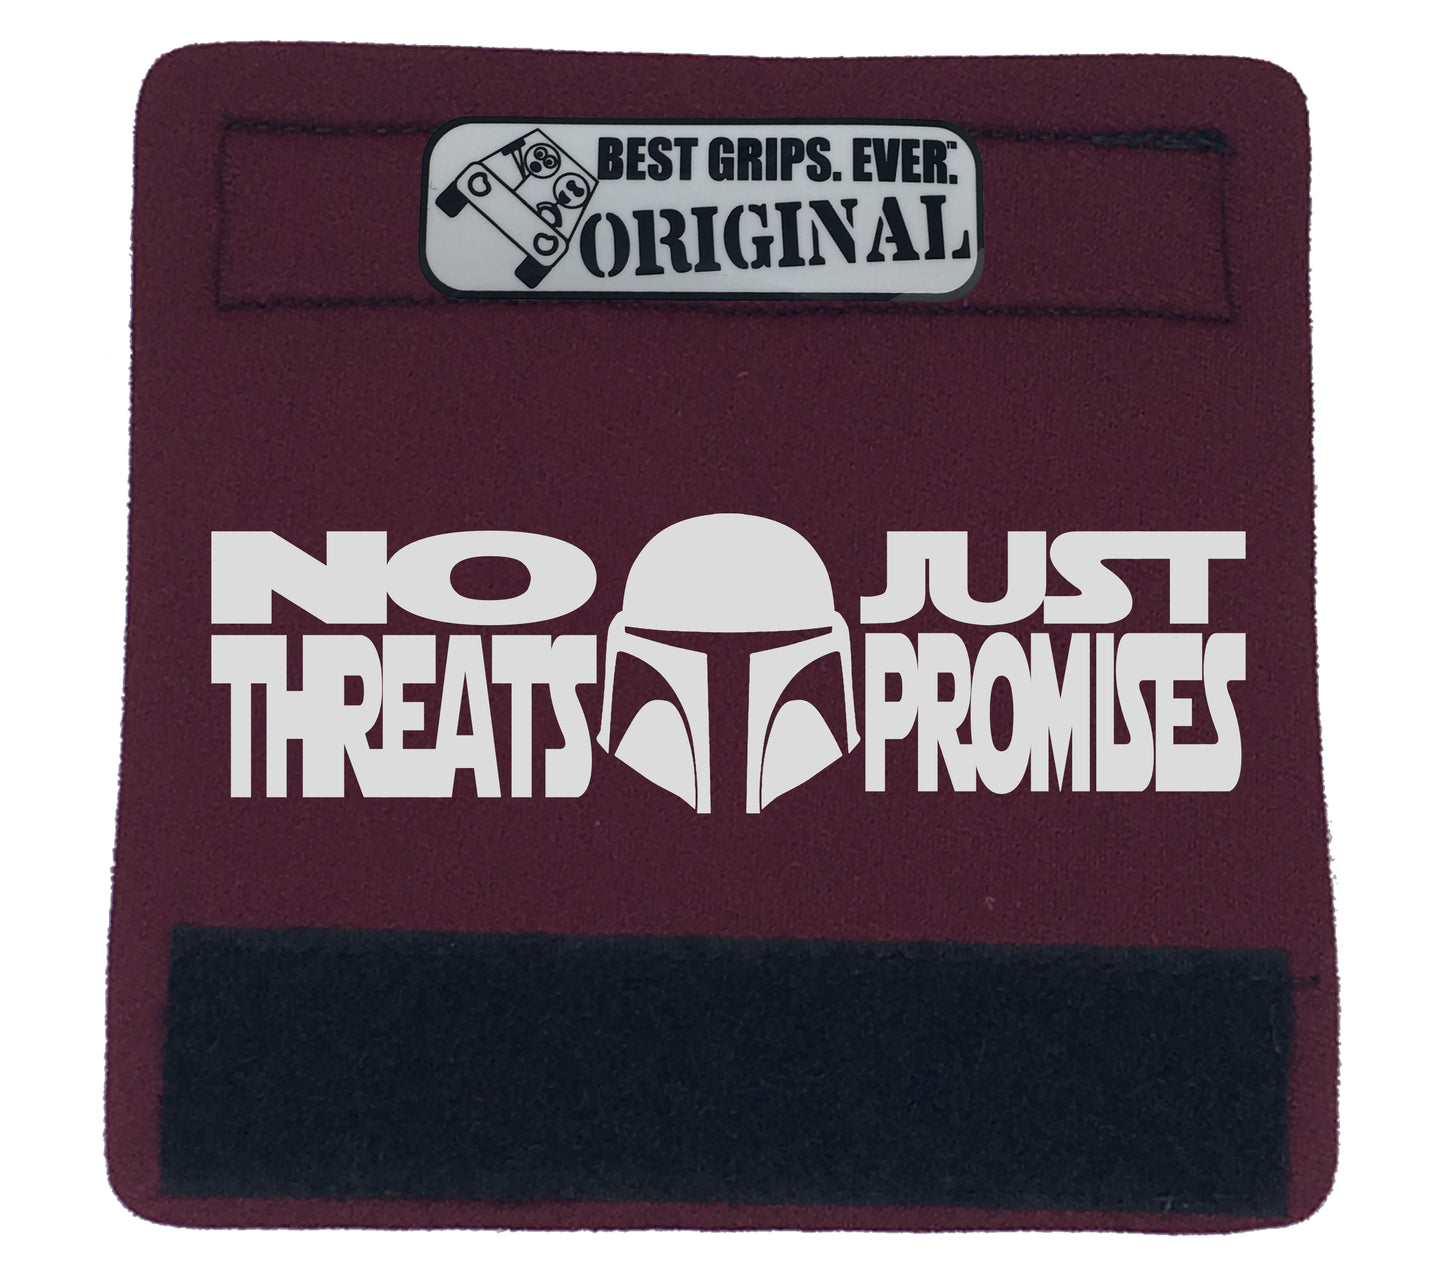 The Promises Grip. - BEST GRIPS. EVER.®